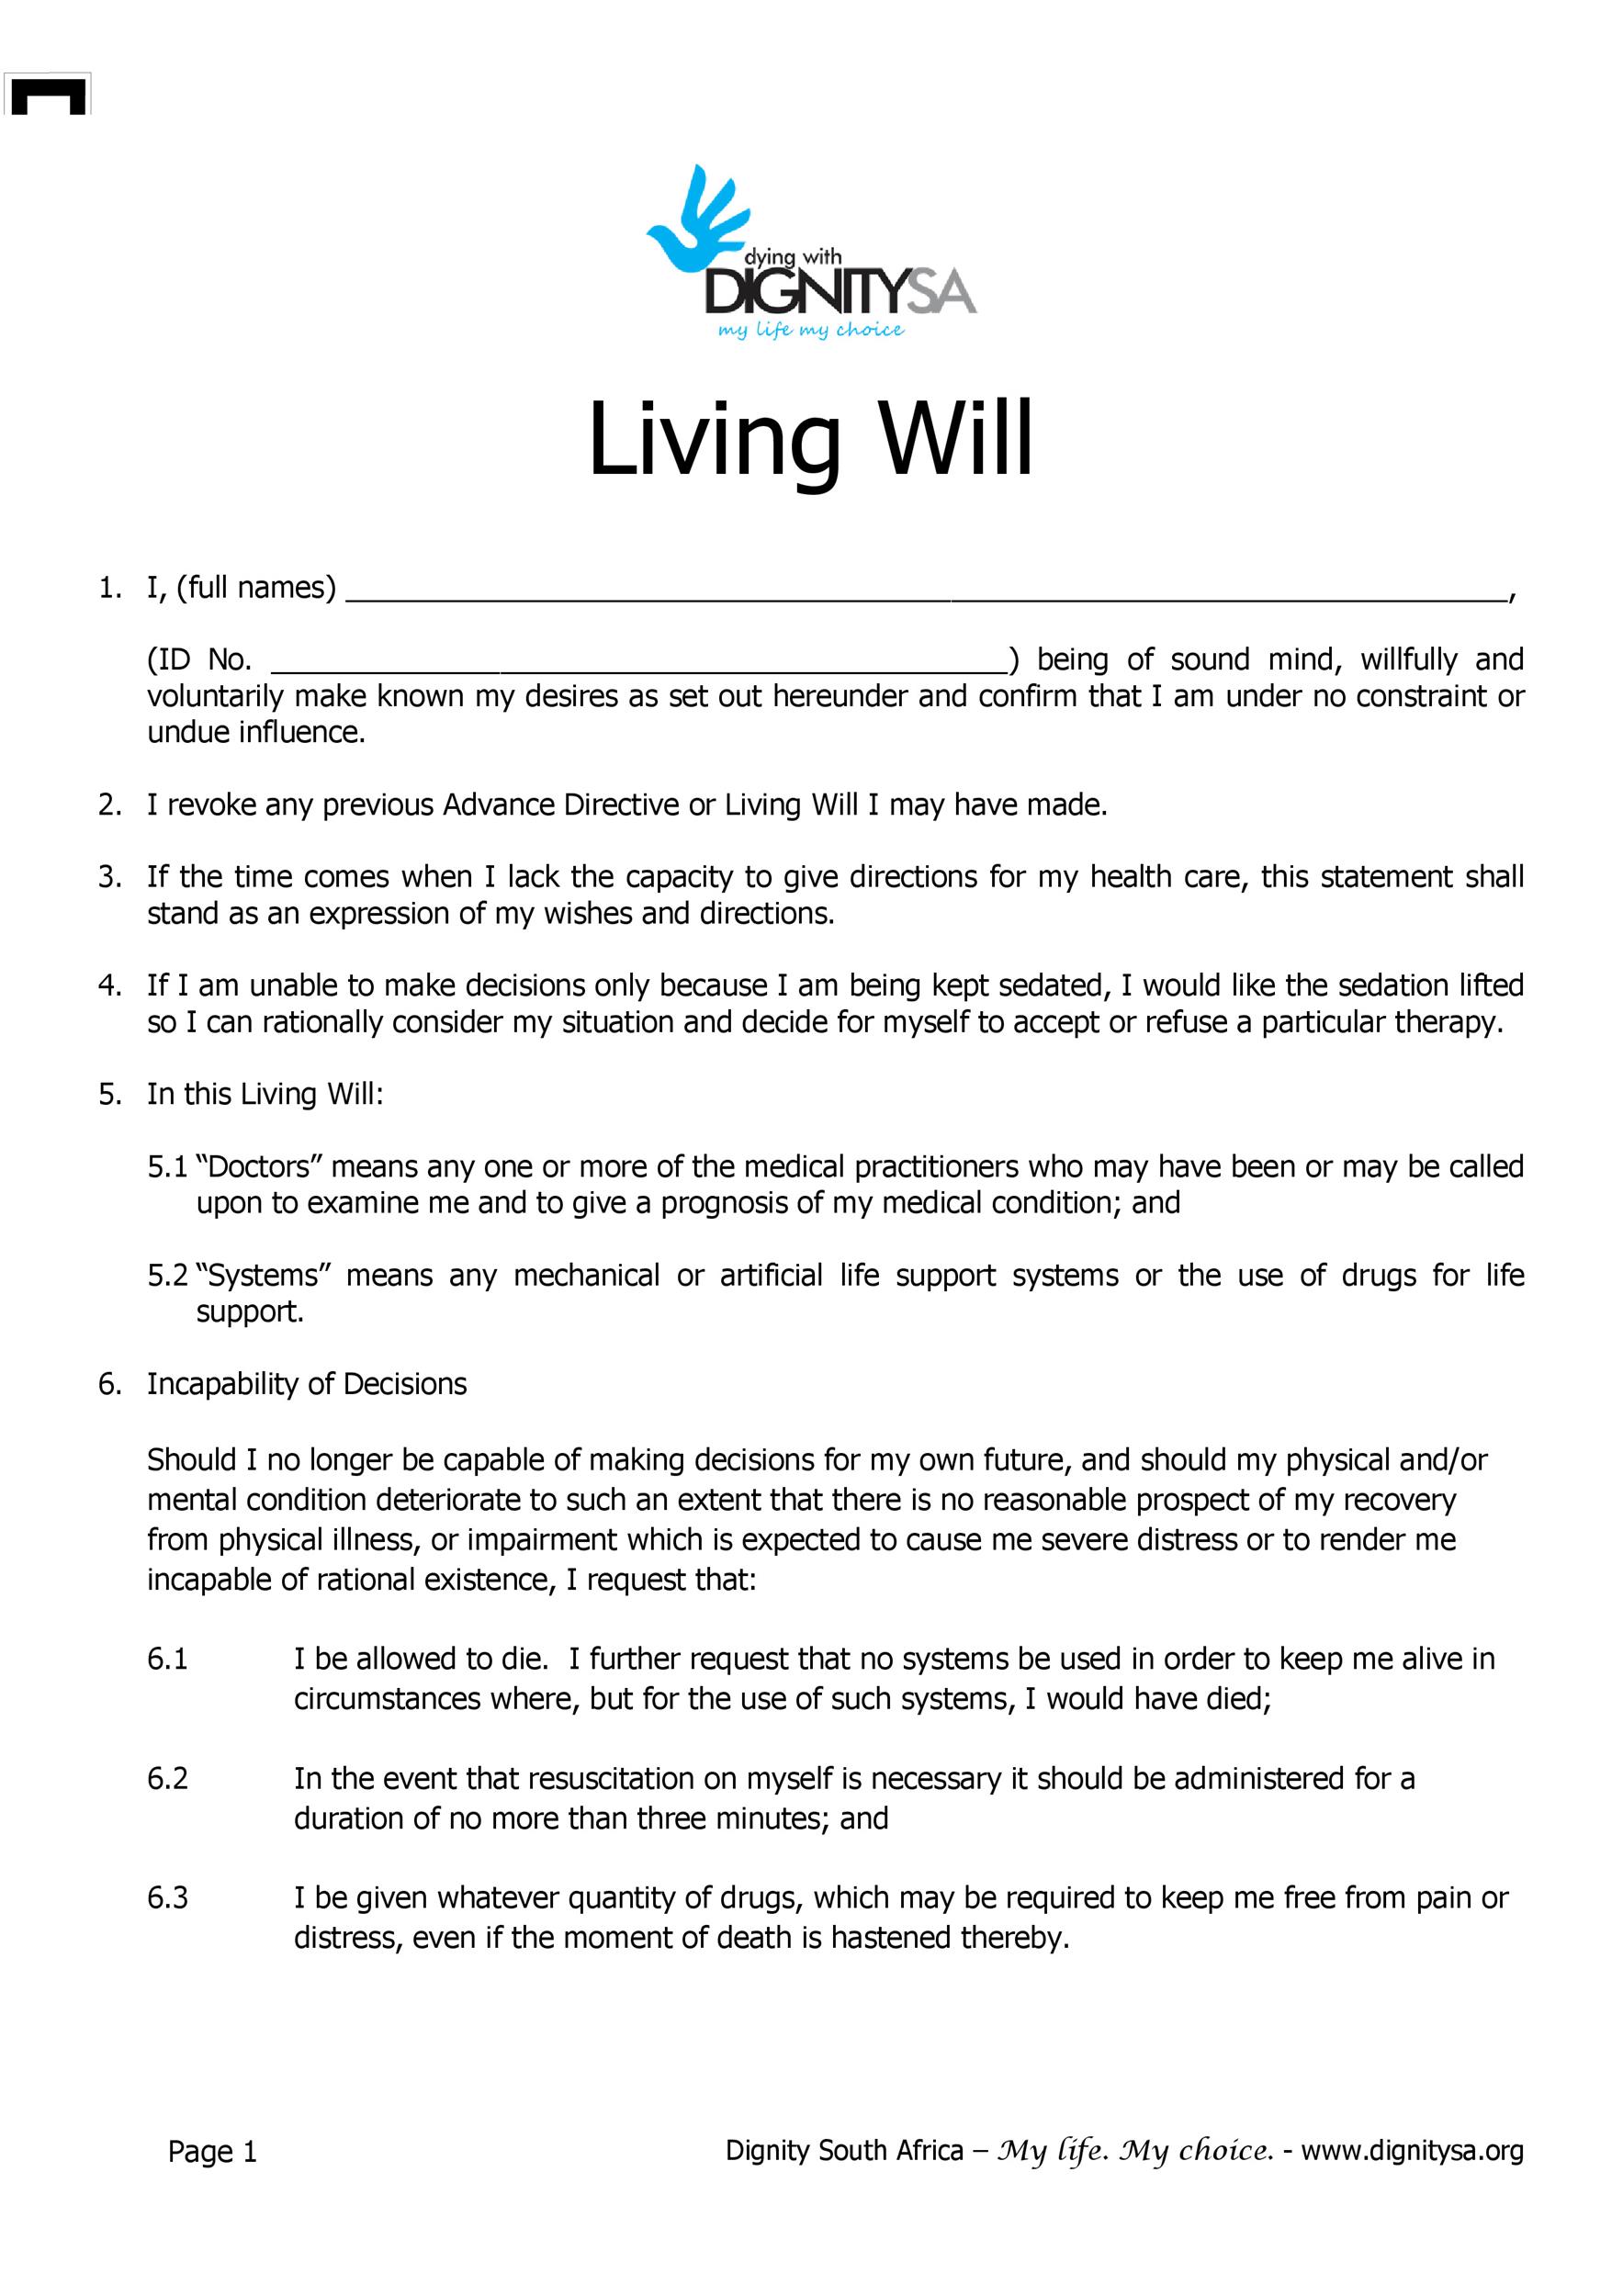 living-will-forms-free-printable